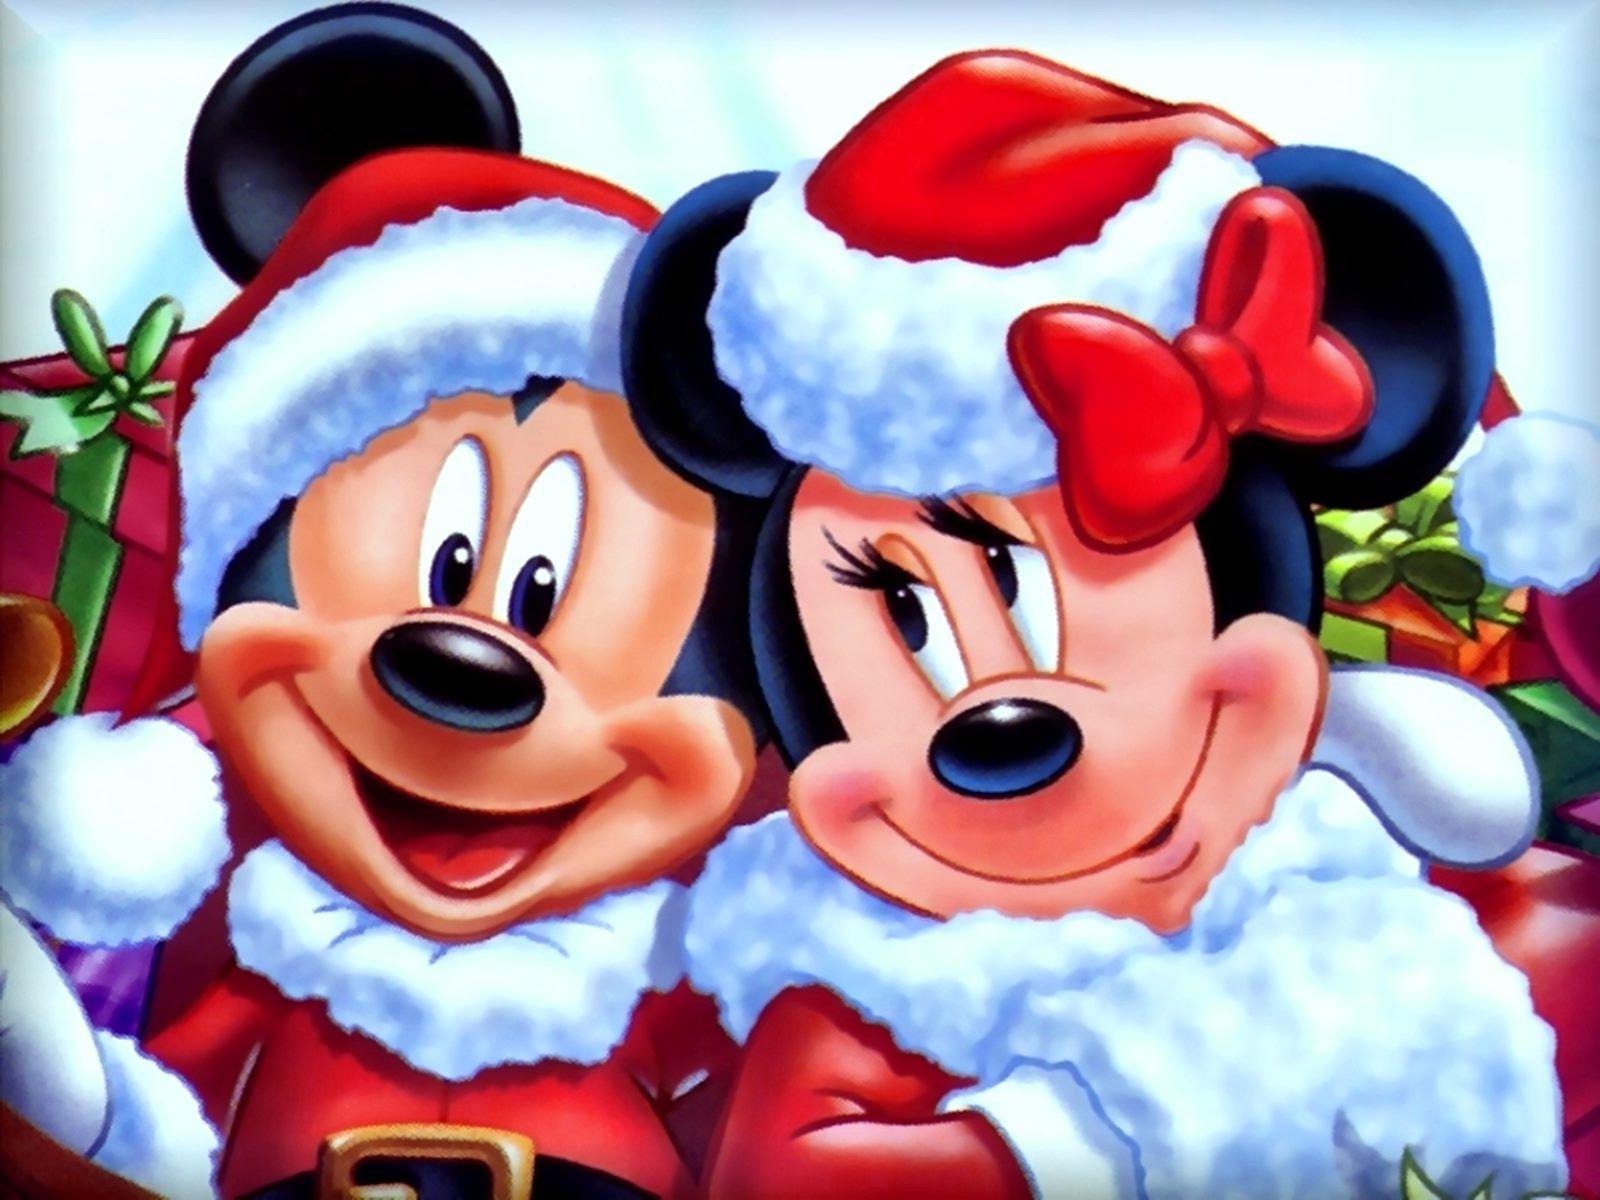 Christmas Mickey and Minnie Wallpapers - Top Free Christmas Mickey and ...